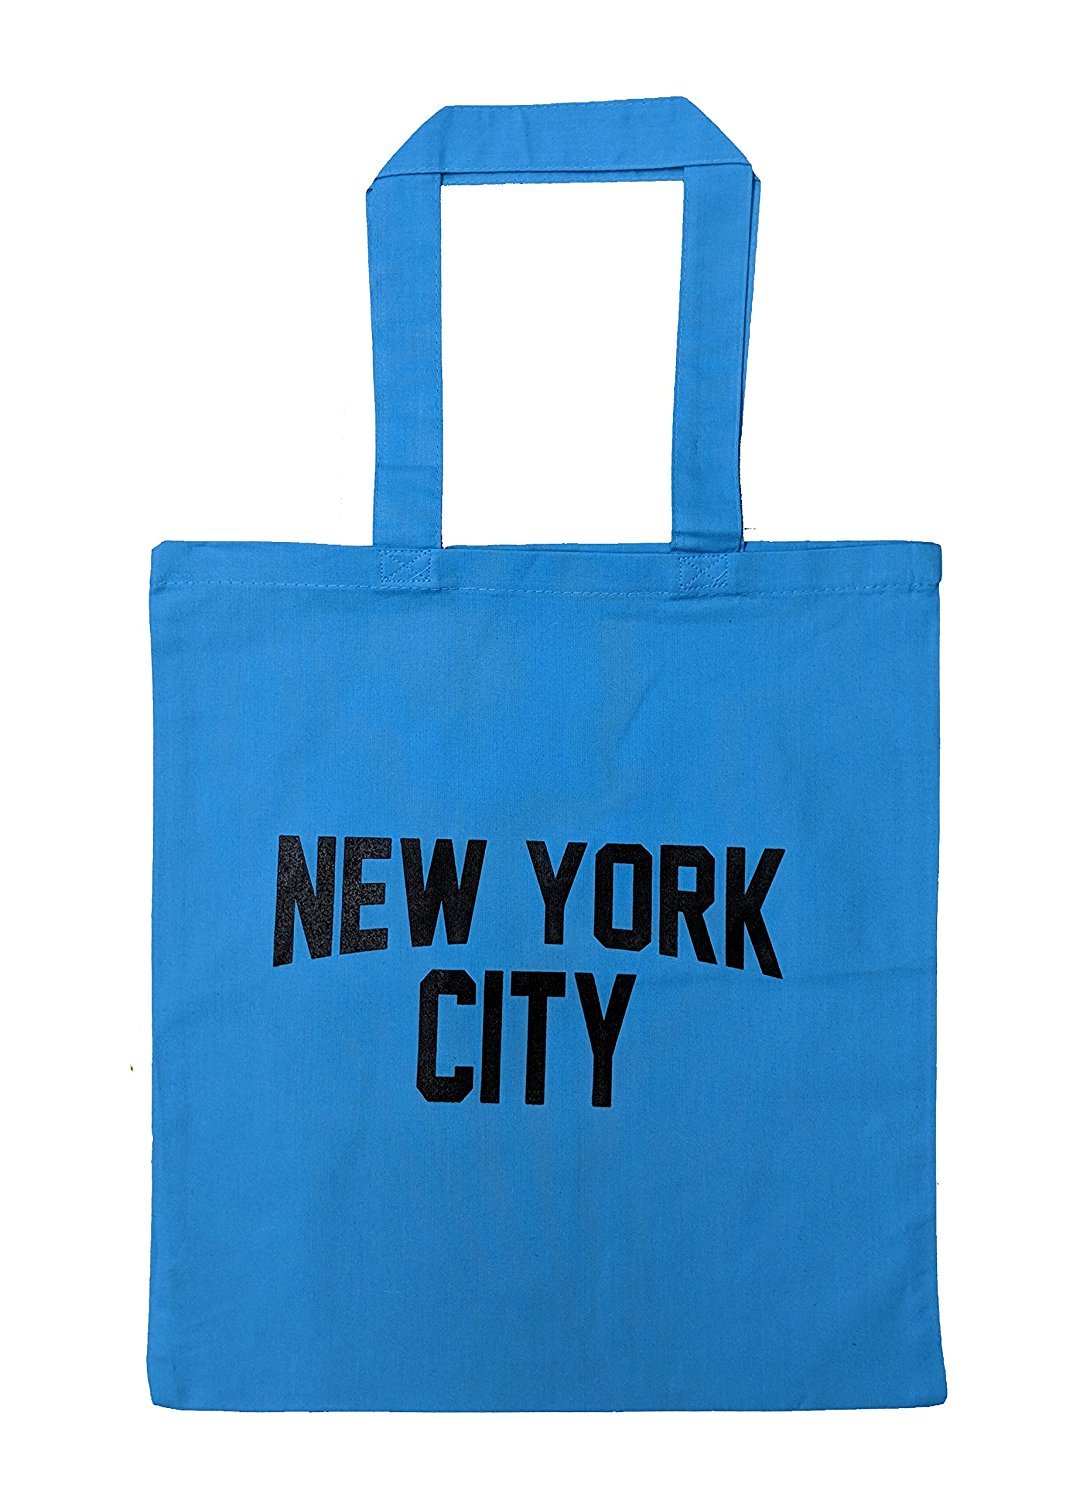 NYC Tote Bag New York City 100% Cotton Canvas Screenprinted (Turquoise)